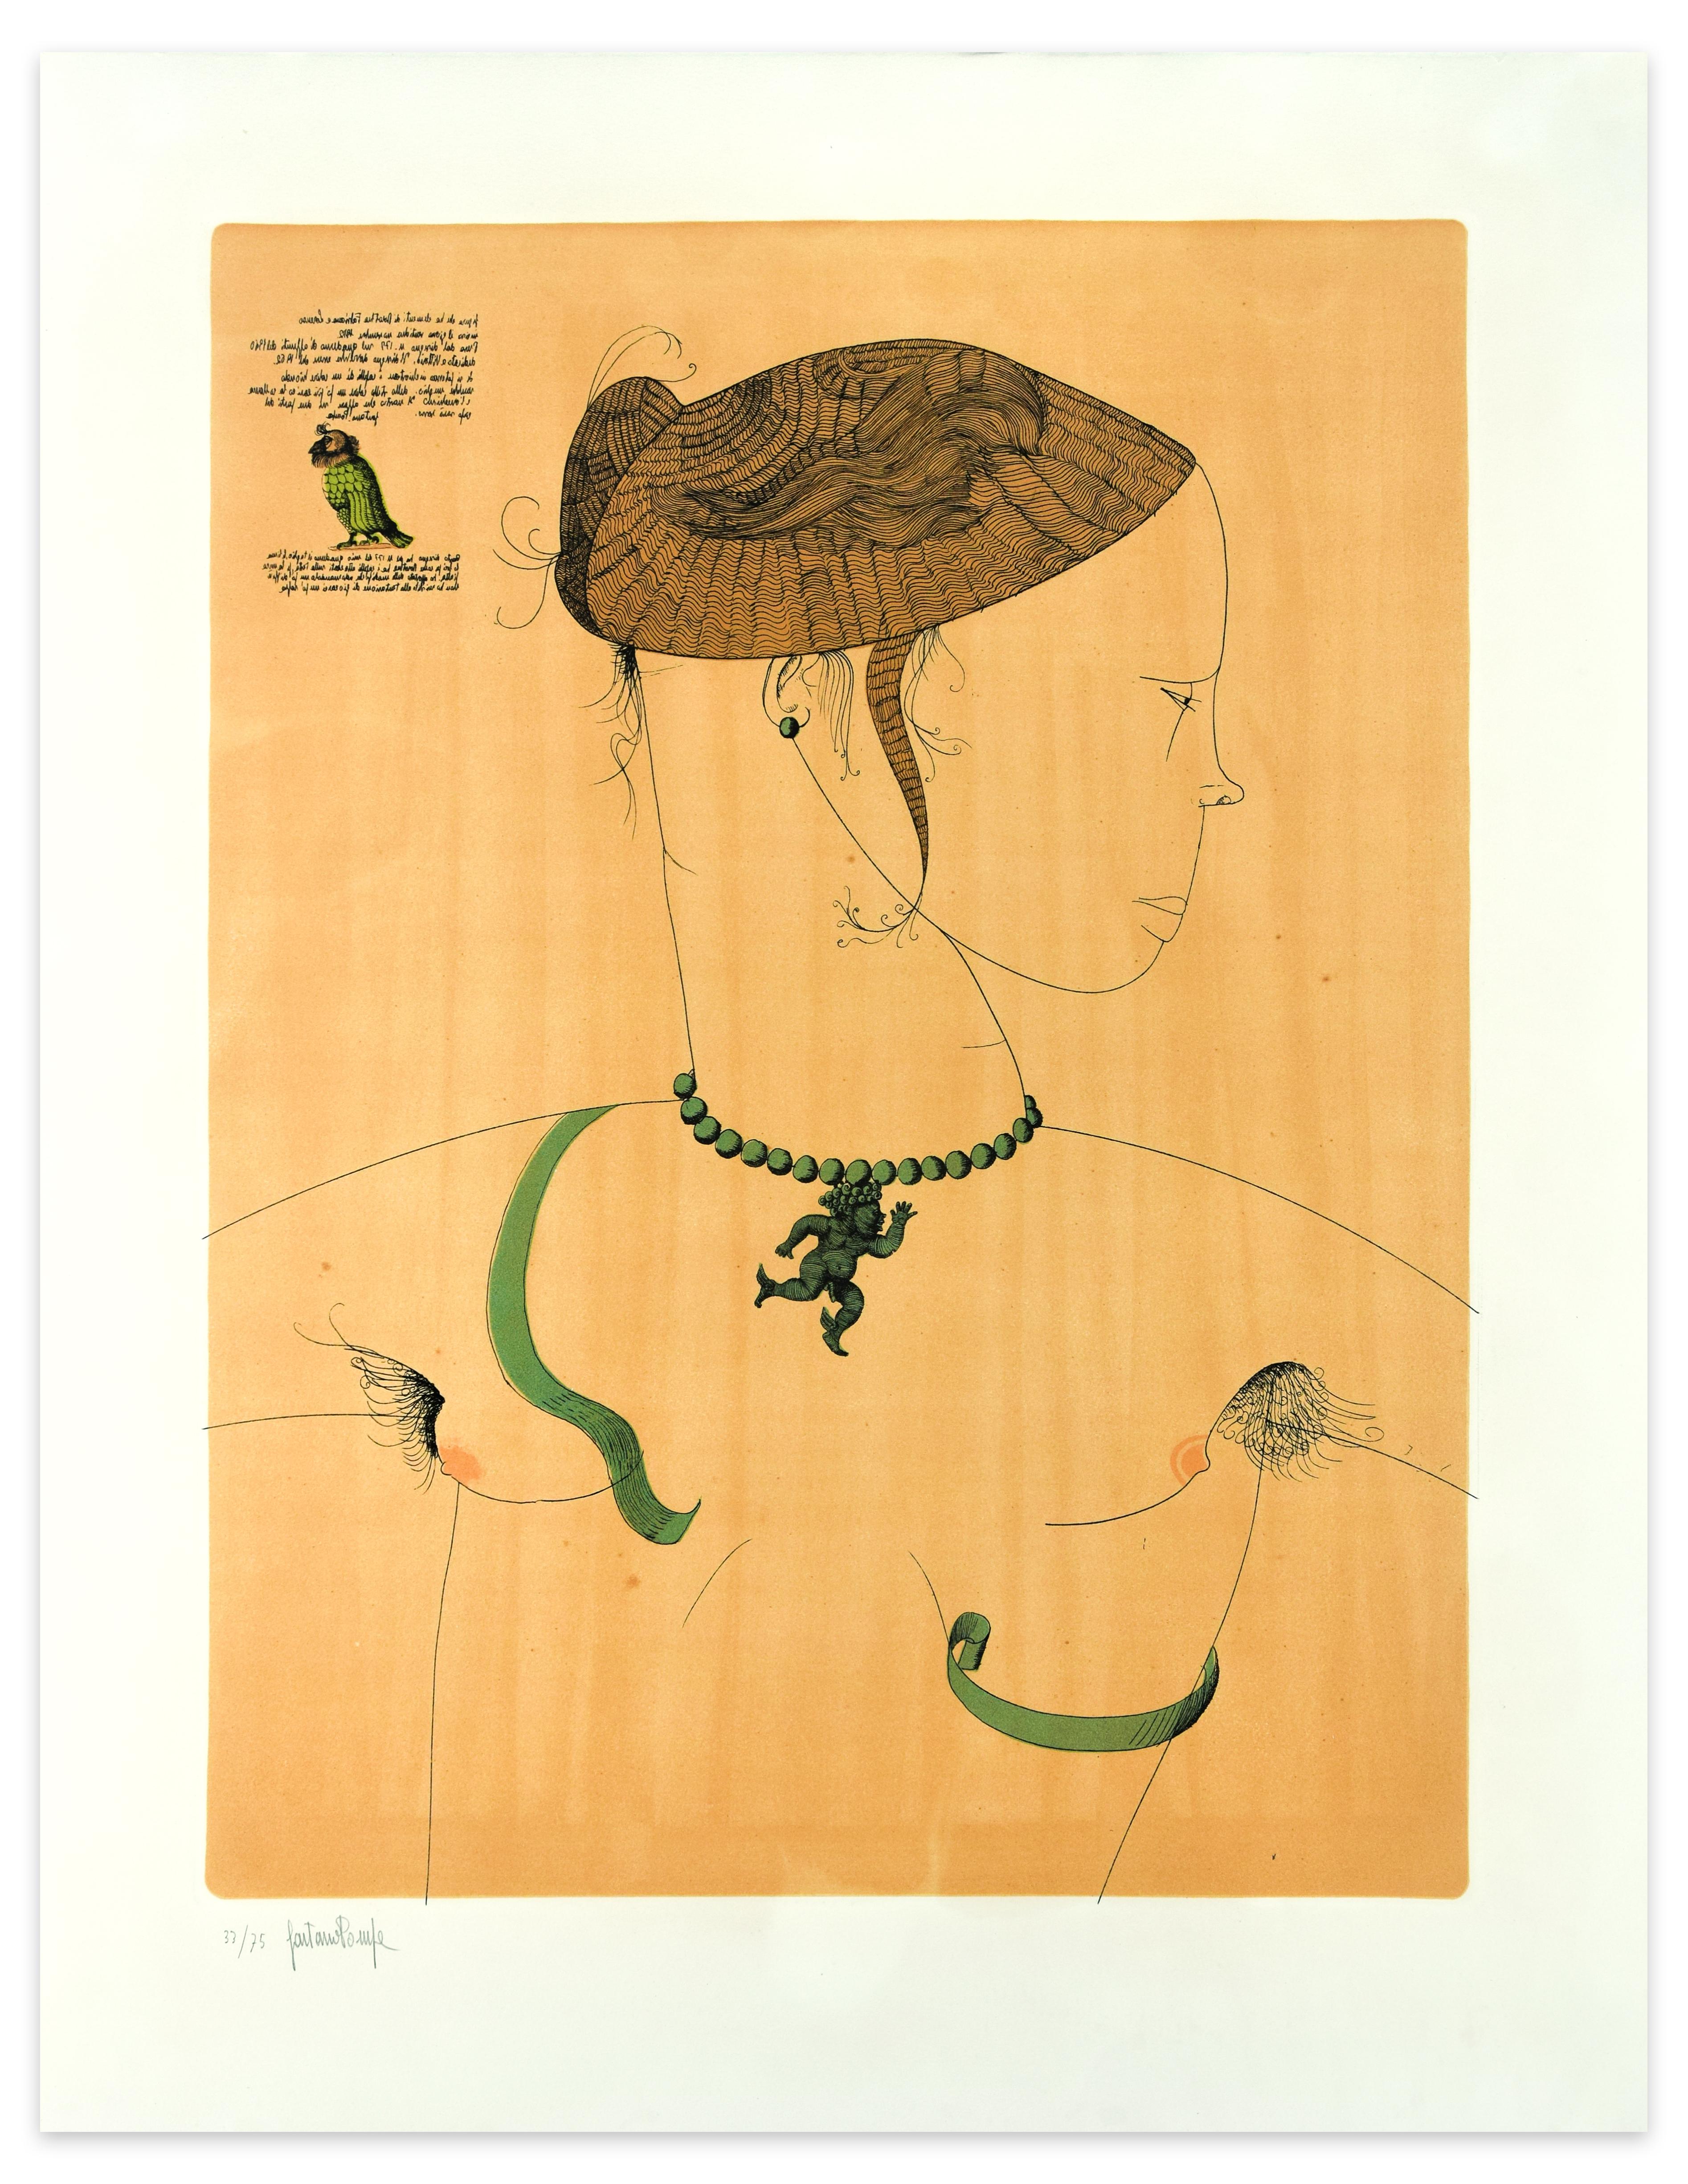 Dorothea e la biscia (Dorothea and the Serpent) is an original color etching, realized in 1963 by the Italian contemporary master, Gaetano Pompa. 

Image dimensions: 64 x 49.5 cm.

Hand-signed and numbered in pencil on the lower left margin. This